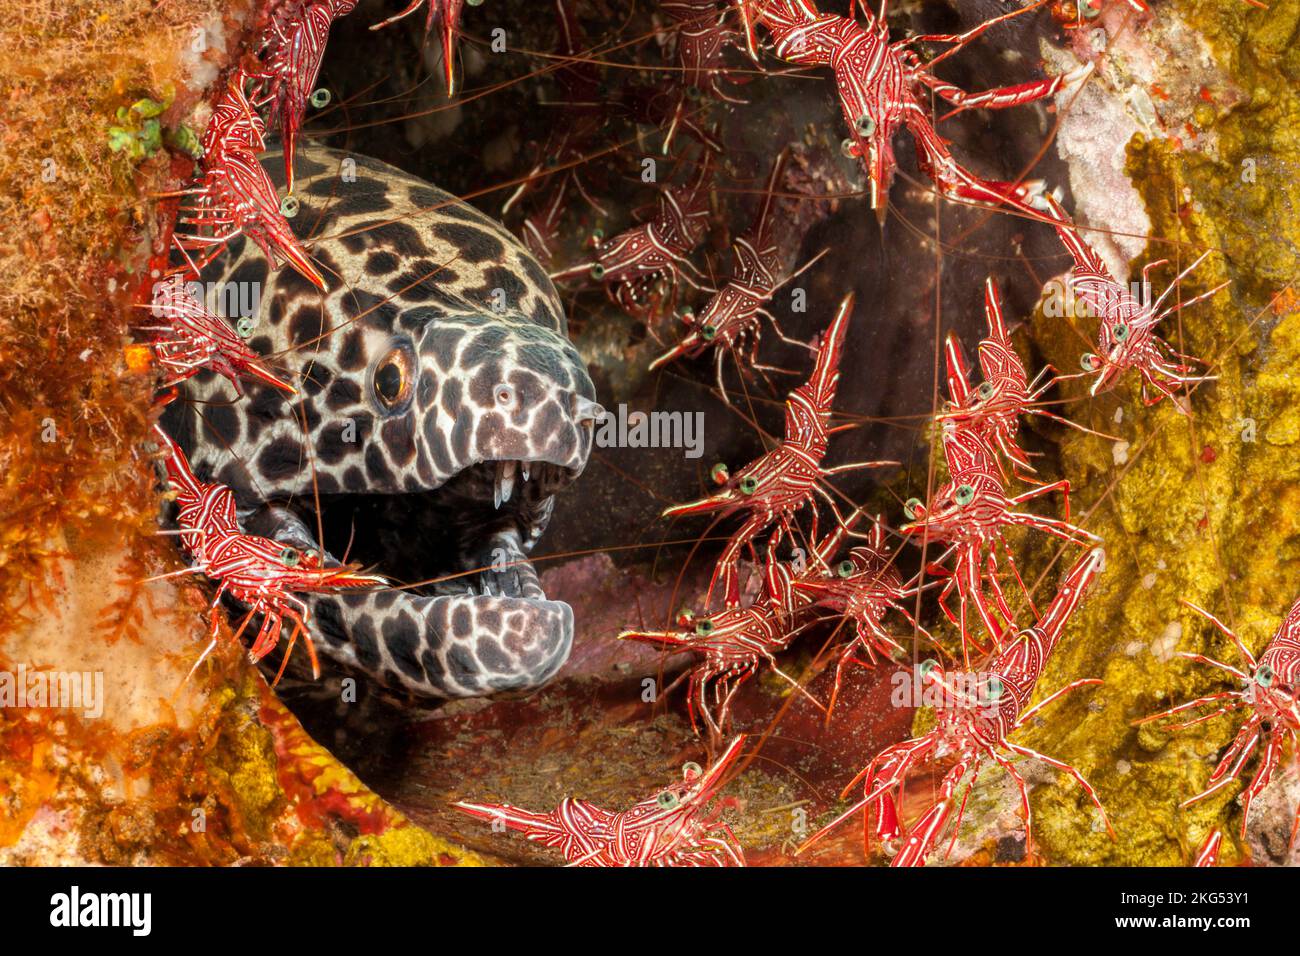 This honeycomb moray eel, Gymnothorax favagineus, is surrounded by male and female dancing shrimp, Rhynchocinetes uritai,  Indonesia. Stock Photo